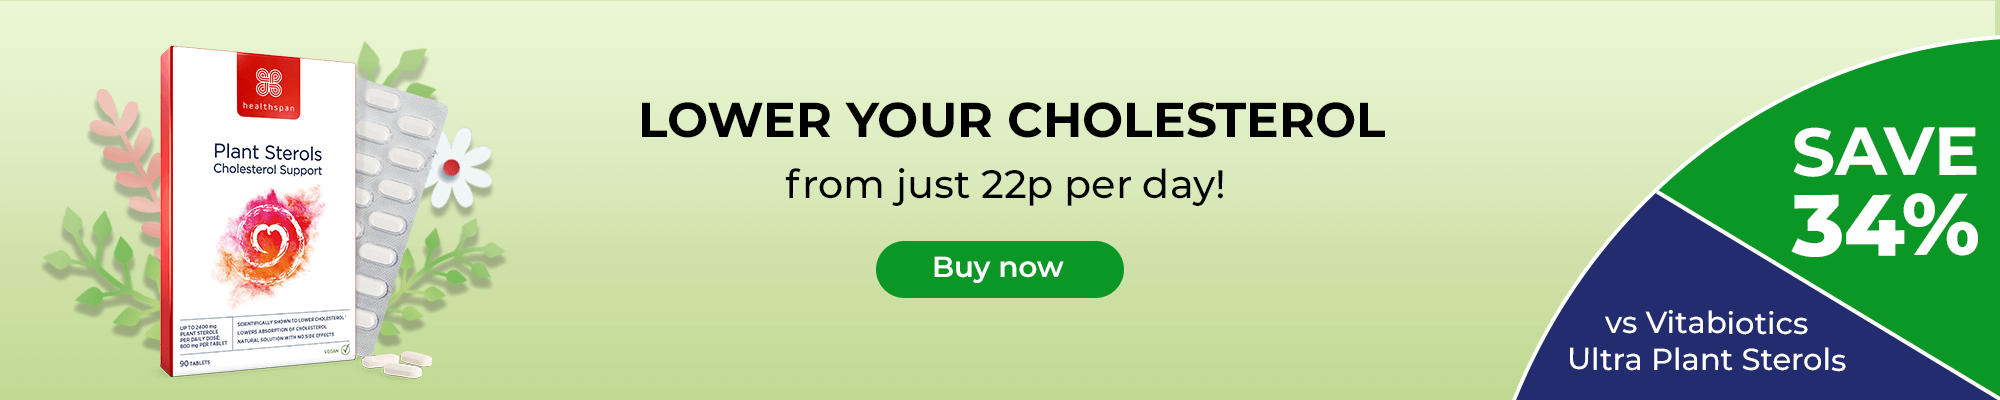 Plant Sterols. Lower your cholesterol from just 22p per day. Buy now